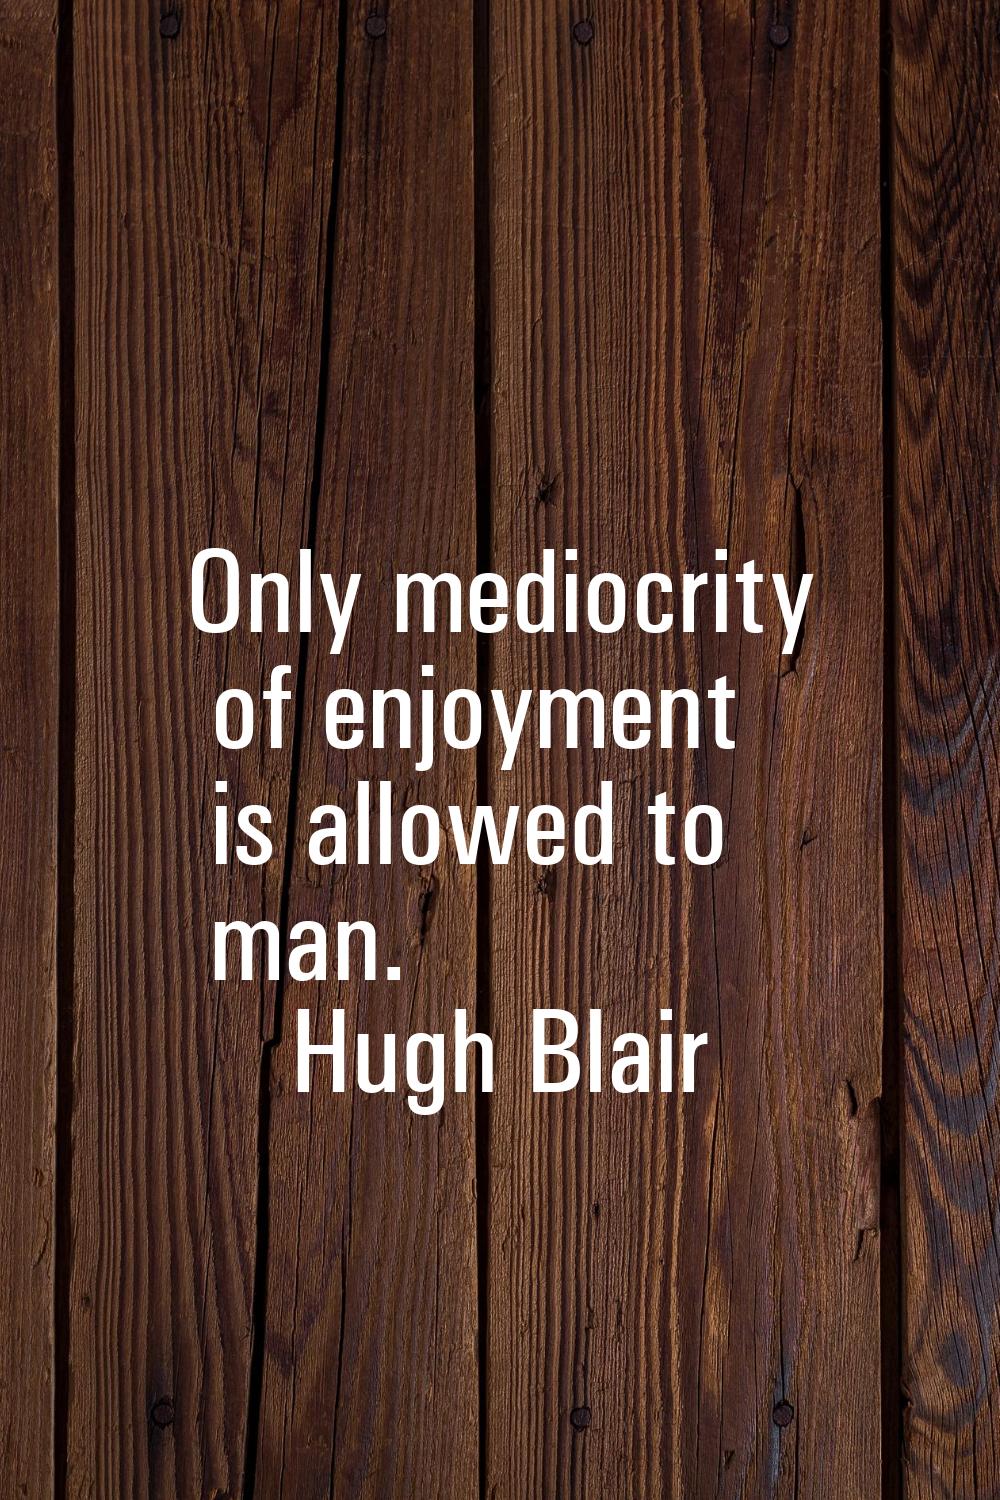 Only mediocrity of enjoyment is allowed to man.